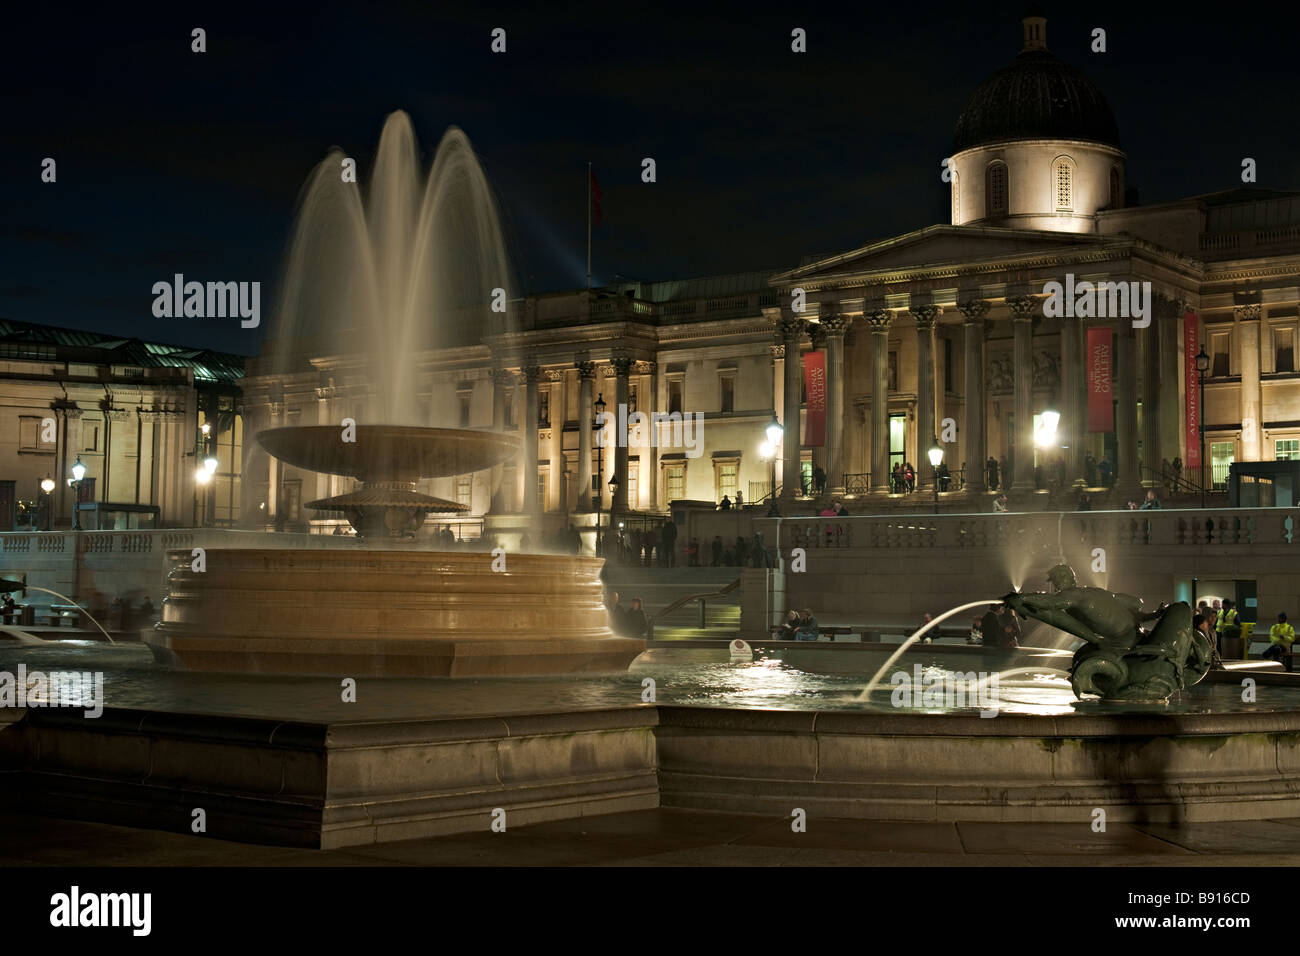 Trafalgar Square fountain London England UK illuminated at night The National Galley is in the background Stock Photo